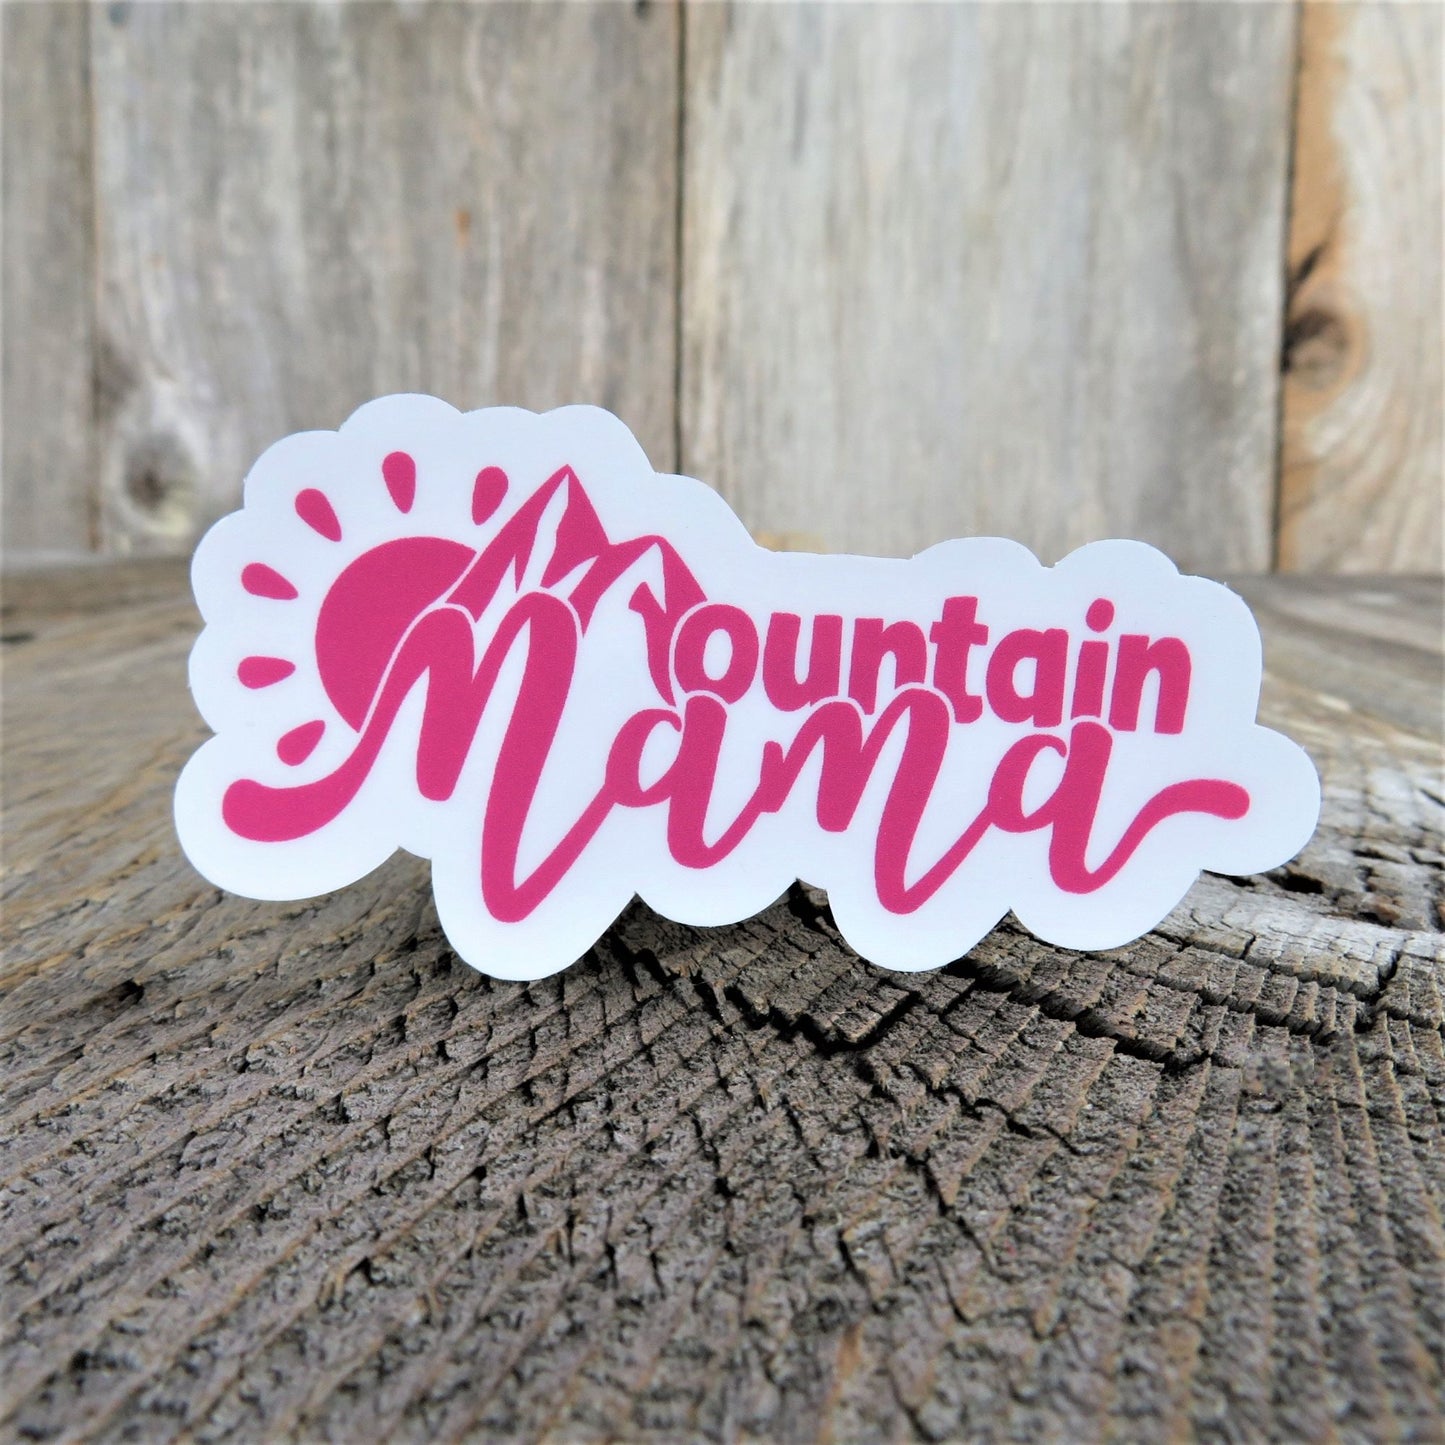 Mountain Mama Sticker Hot Pink Decal Full Color Waterproof Car Water Bottle Laptop